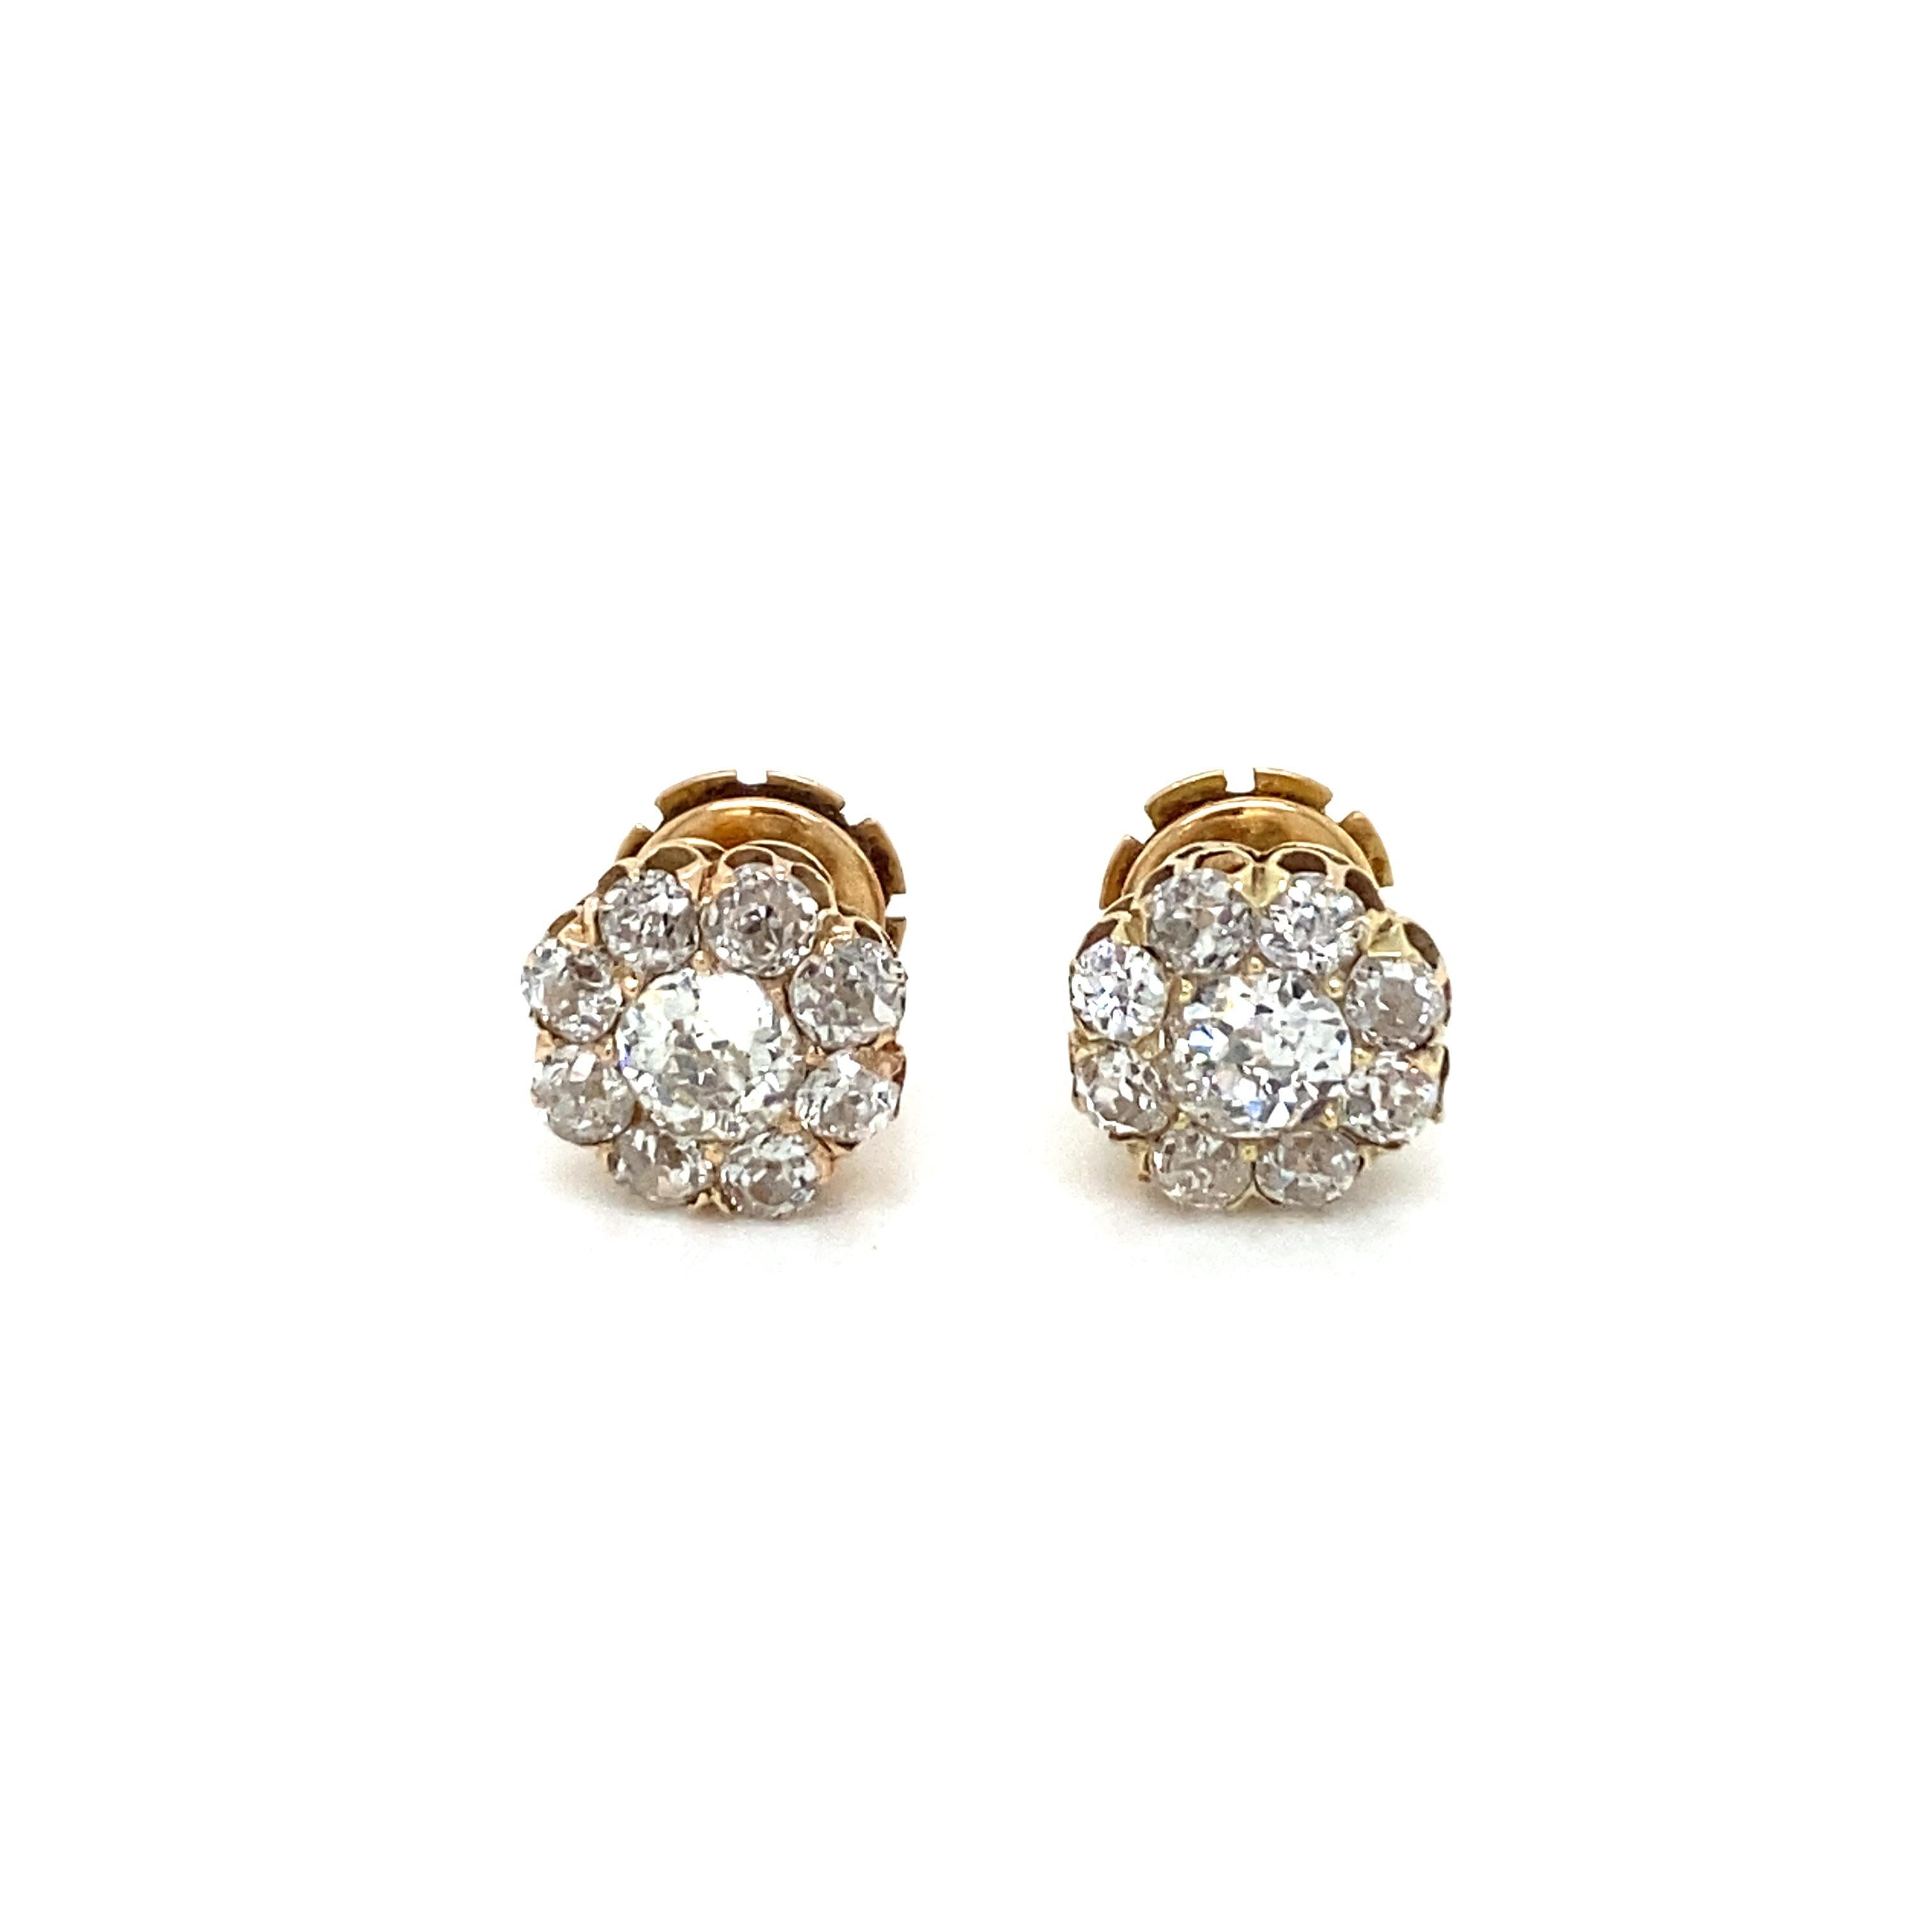 An enchanting pair of Retro diamond cluster earrings set in 18k yellow gold. They feature a cluster of old mine cut diamonds for a total weight of 3.70 carats (color H-I clarity VS2). 1950'

CONDITION: Pre-owned - Excellent 
METAL: 18k Gold
STONE: